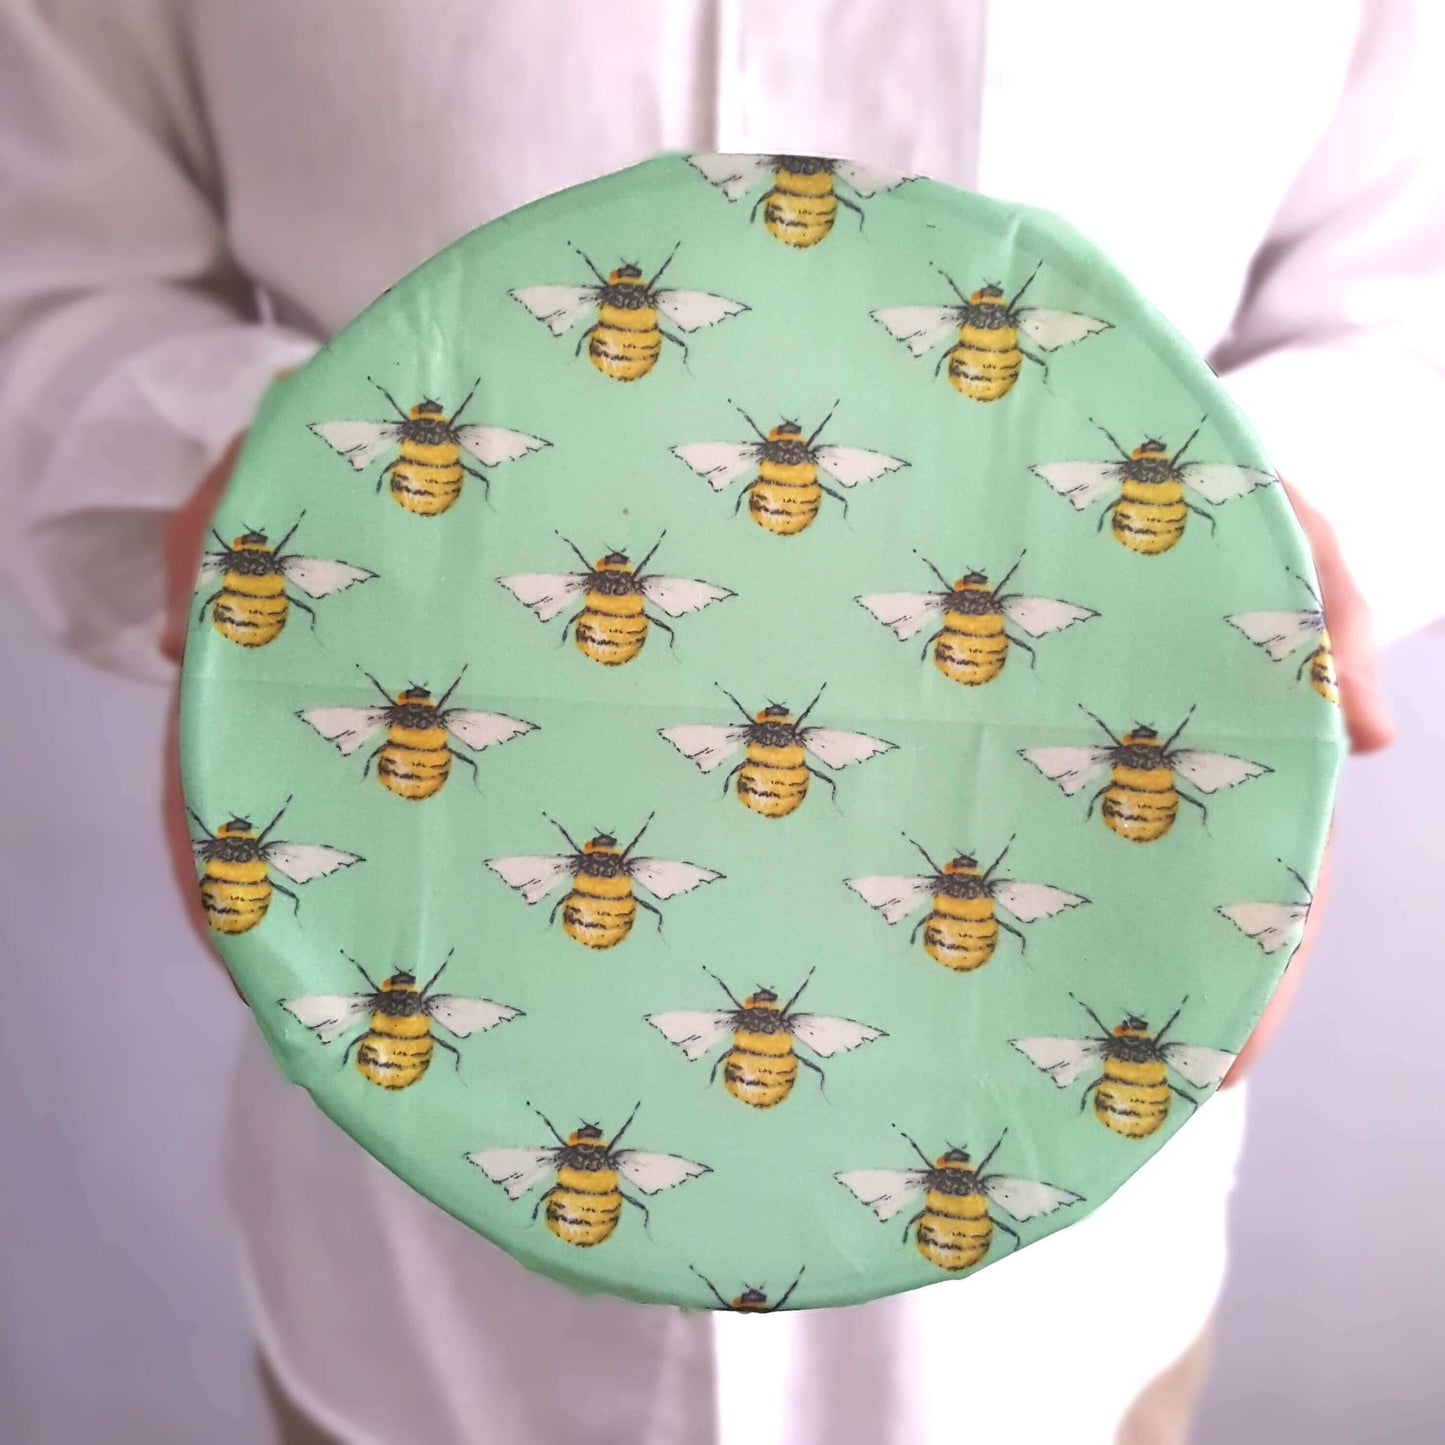 Reusable Beeswax Food Wraps 100% Hand Made in the UK by Honey Bee Good. Earth Kind Classic set of 3 in Green Bees on bowl